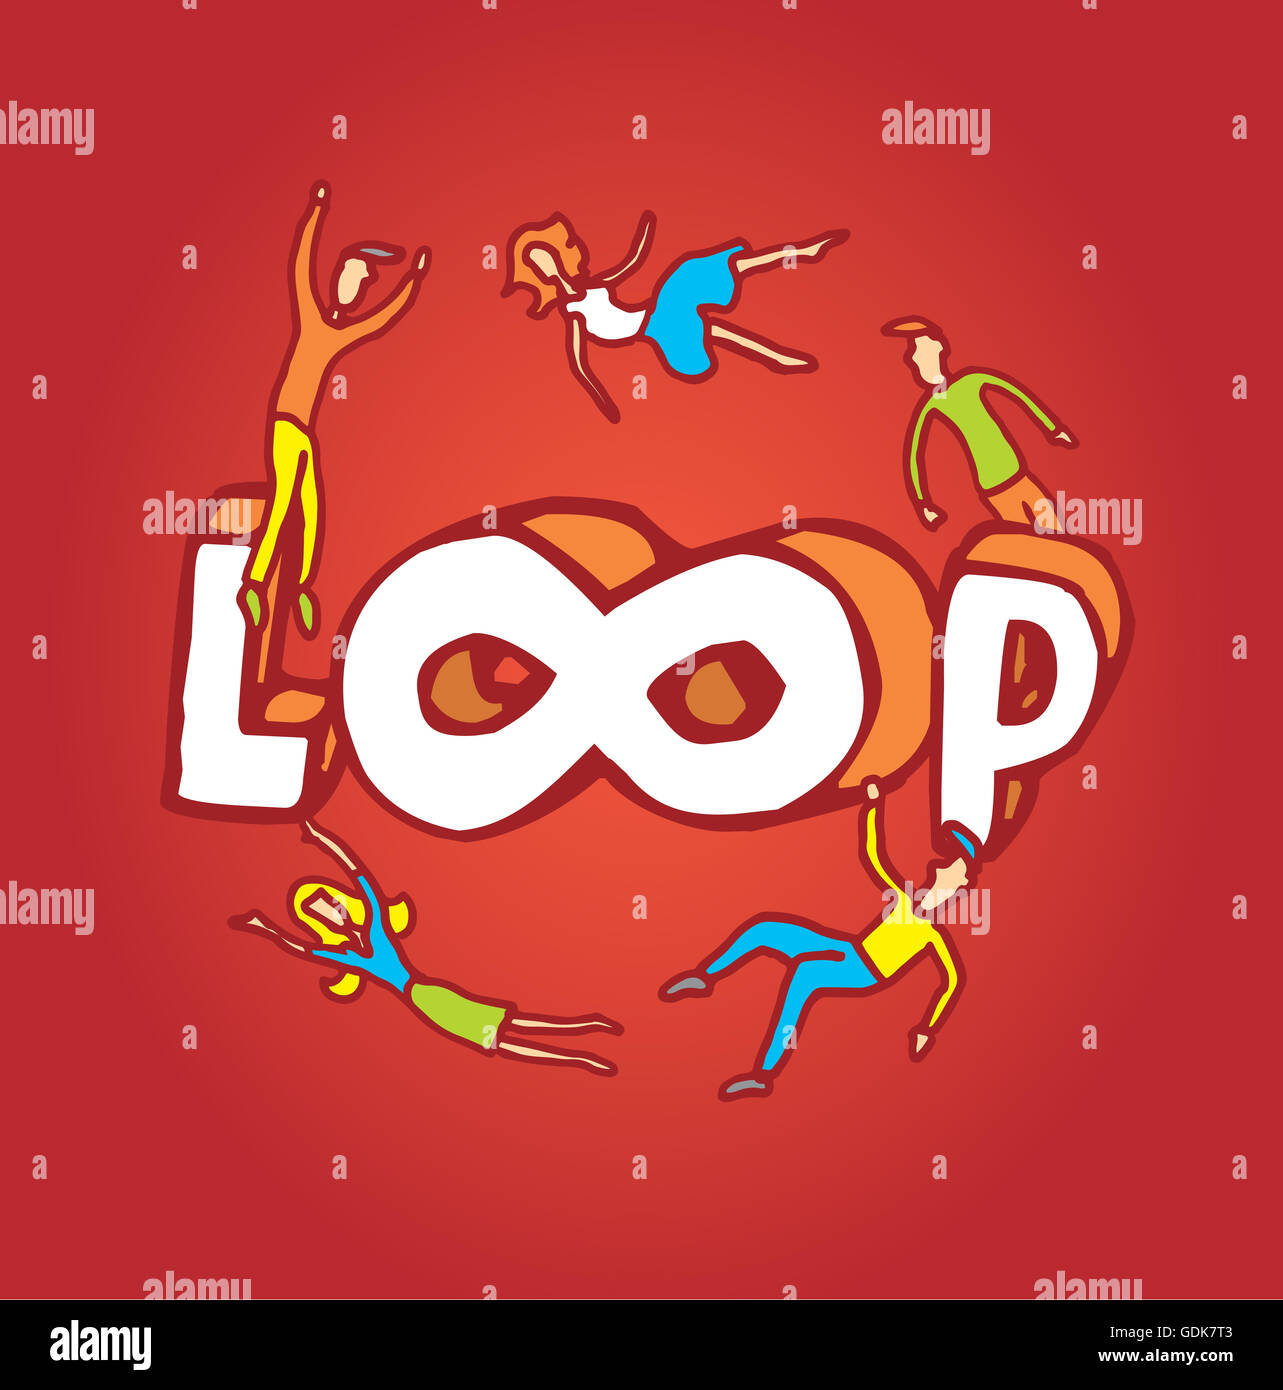 Cartoon illustration of an infinite loop word with people floating around Stock Photo